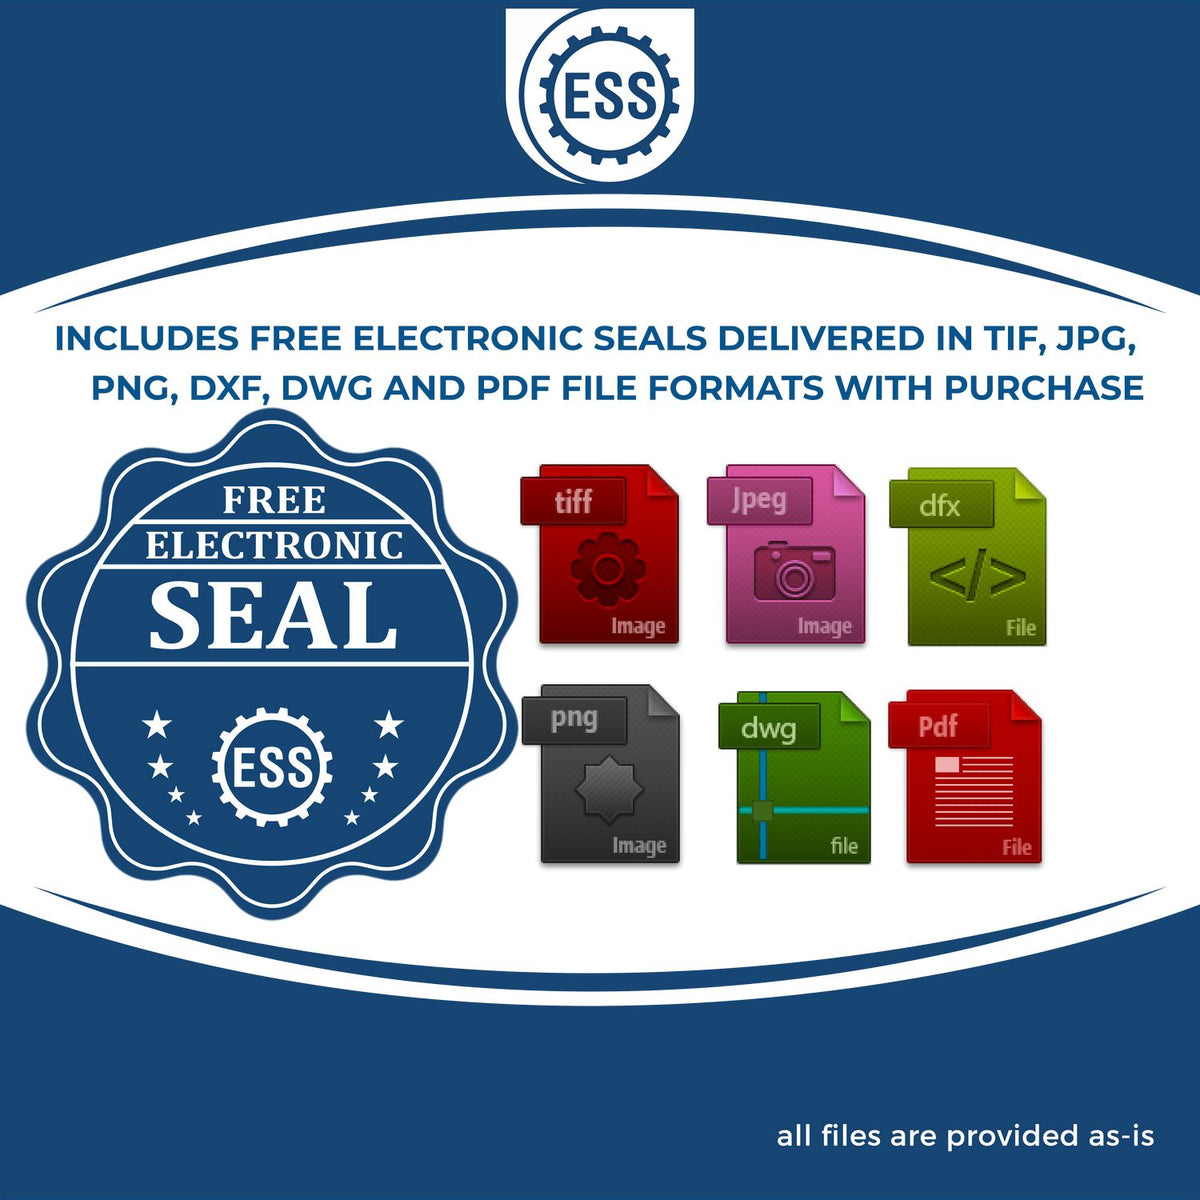 An infographic for the free electronic seal for the Long Reach Tennessee Geology Seal illustrating the different file type icons such as DXF, DWG, TIF, JPG and PNG.